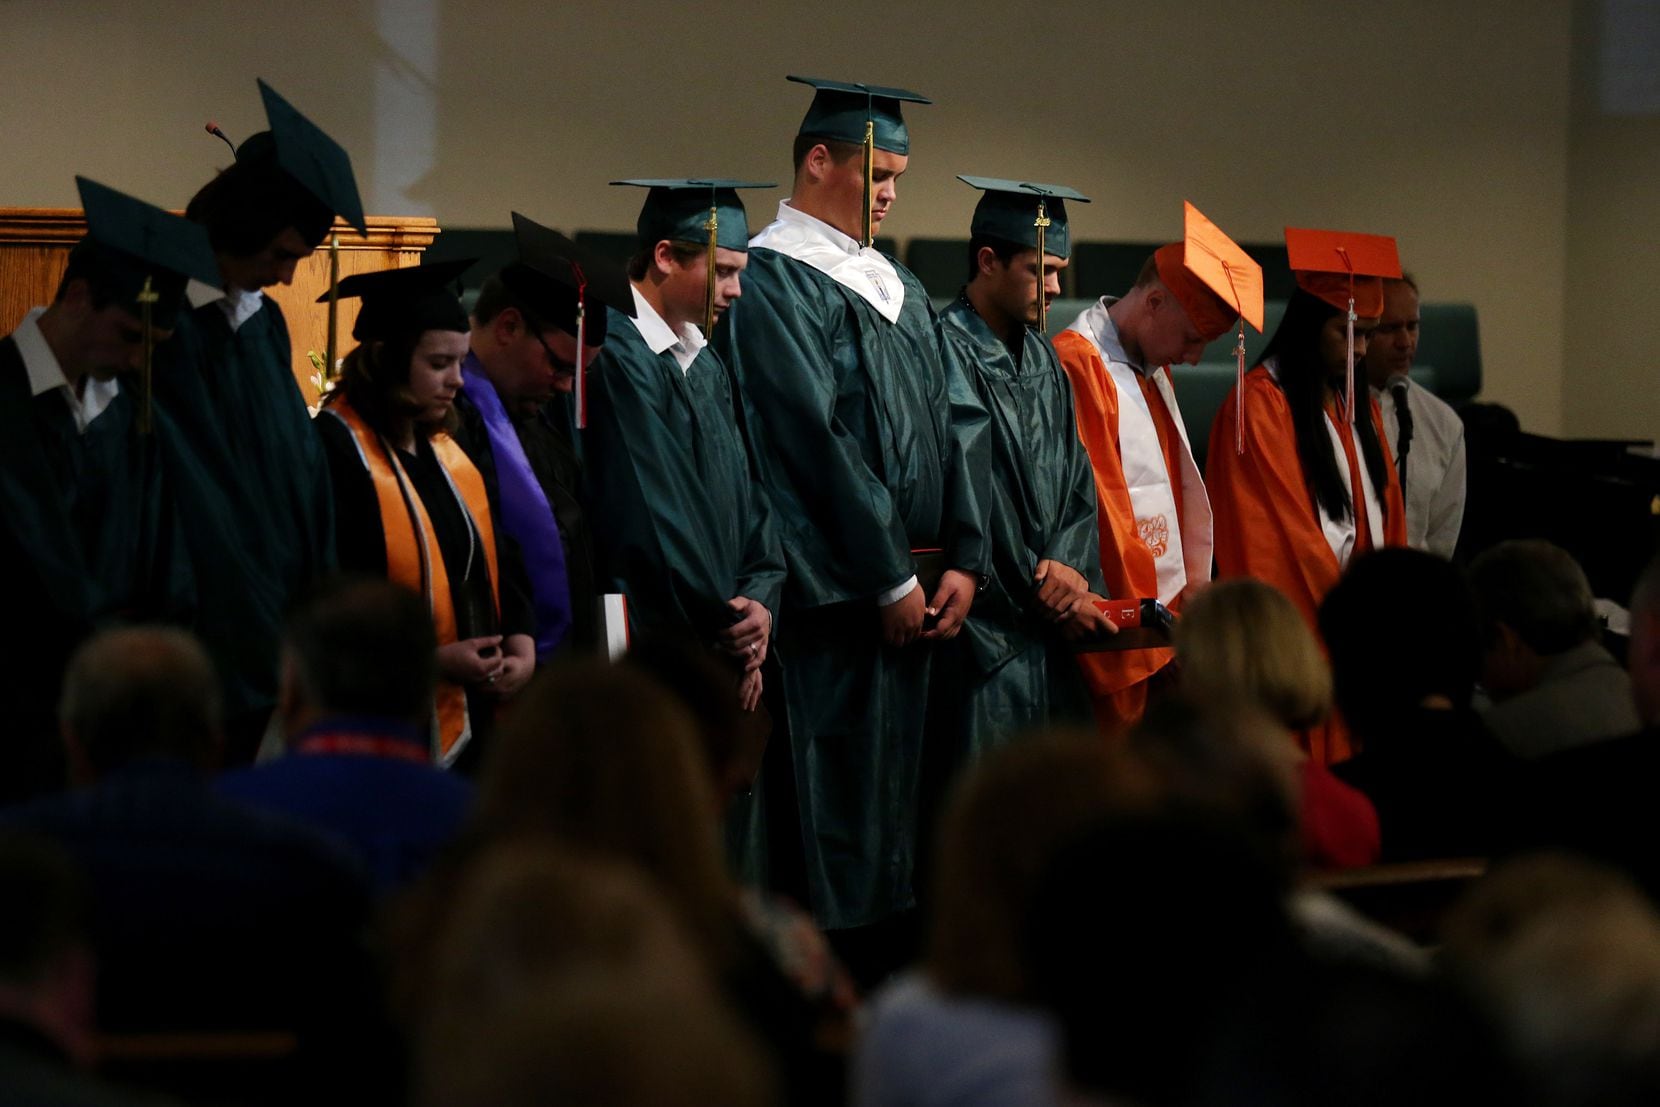 Graduating high school seniors are recognized during worship service at Arcadia First Baptist Church in Santa Fe, Texas Sunday May 20, 2018. Gov. Greg Abbott, Lt. Gov. Dan Patrick, and others were in attendance at the service.